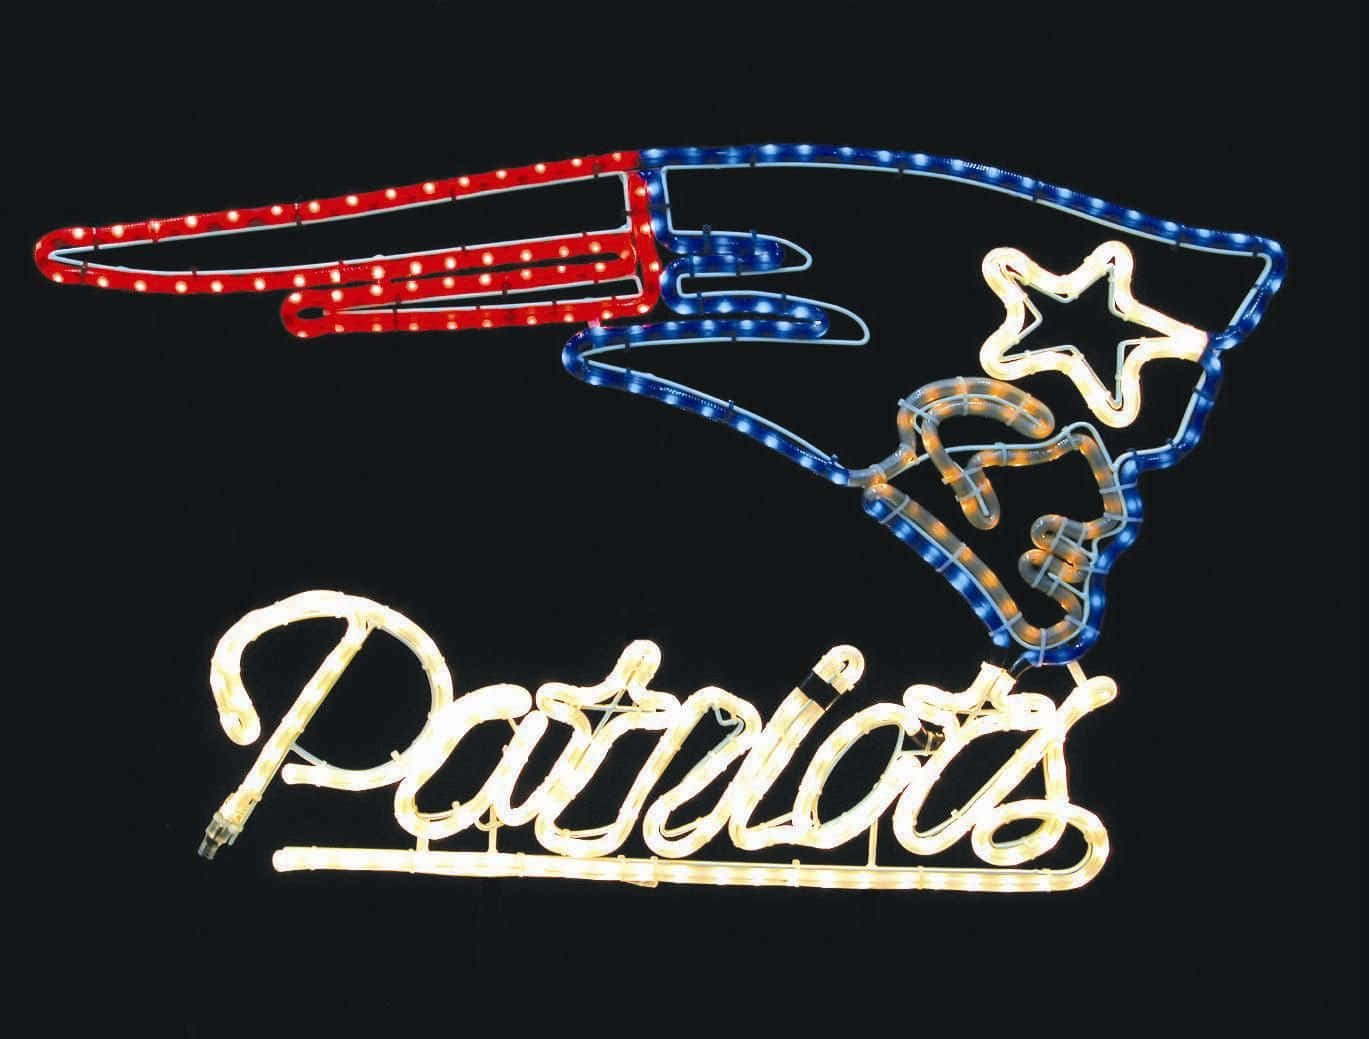 New England Patriots team logo on a flag with bold red, white, and blue colors